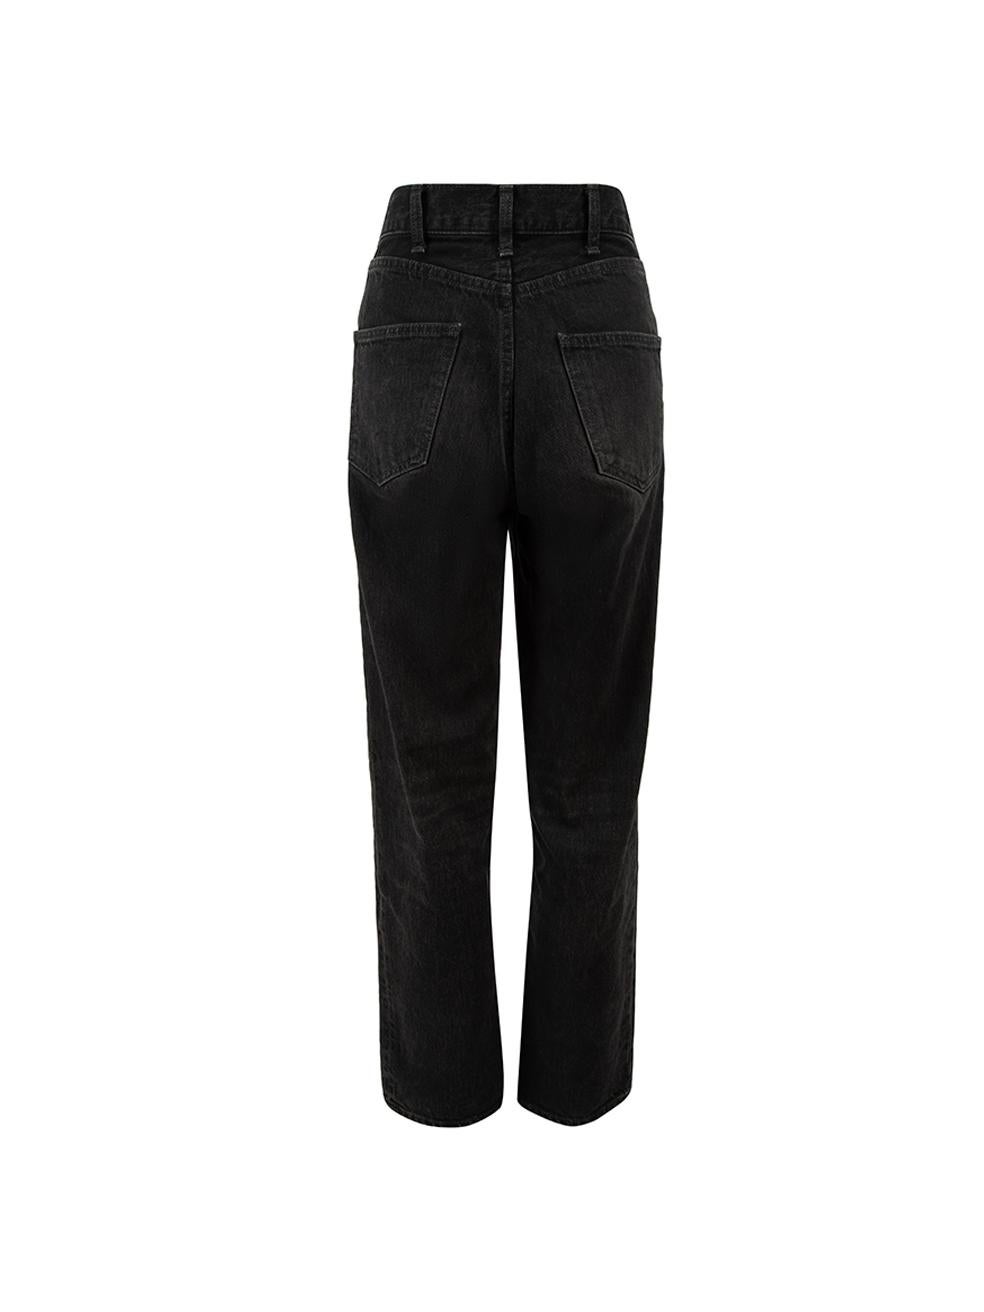 CONDITION is Very good. Minimal wear to jeans is evident. Minimal wear to the hardware which is tarnished on this used Céline designer resale item. Details Anthracite Denim Straight leg jeans High waisted Front zip closure with button Front side